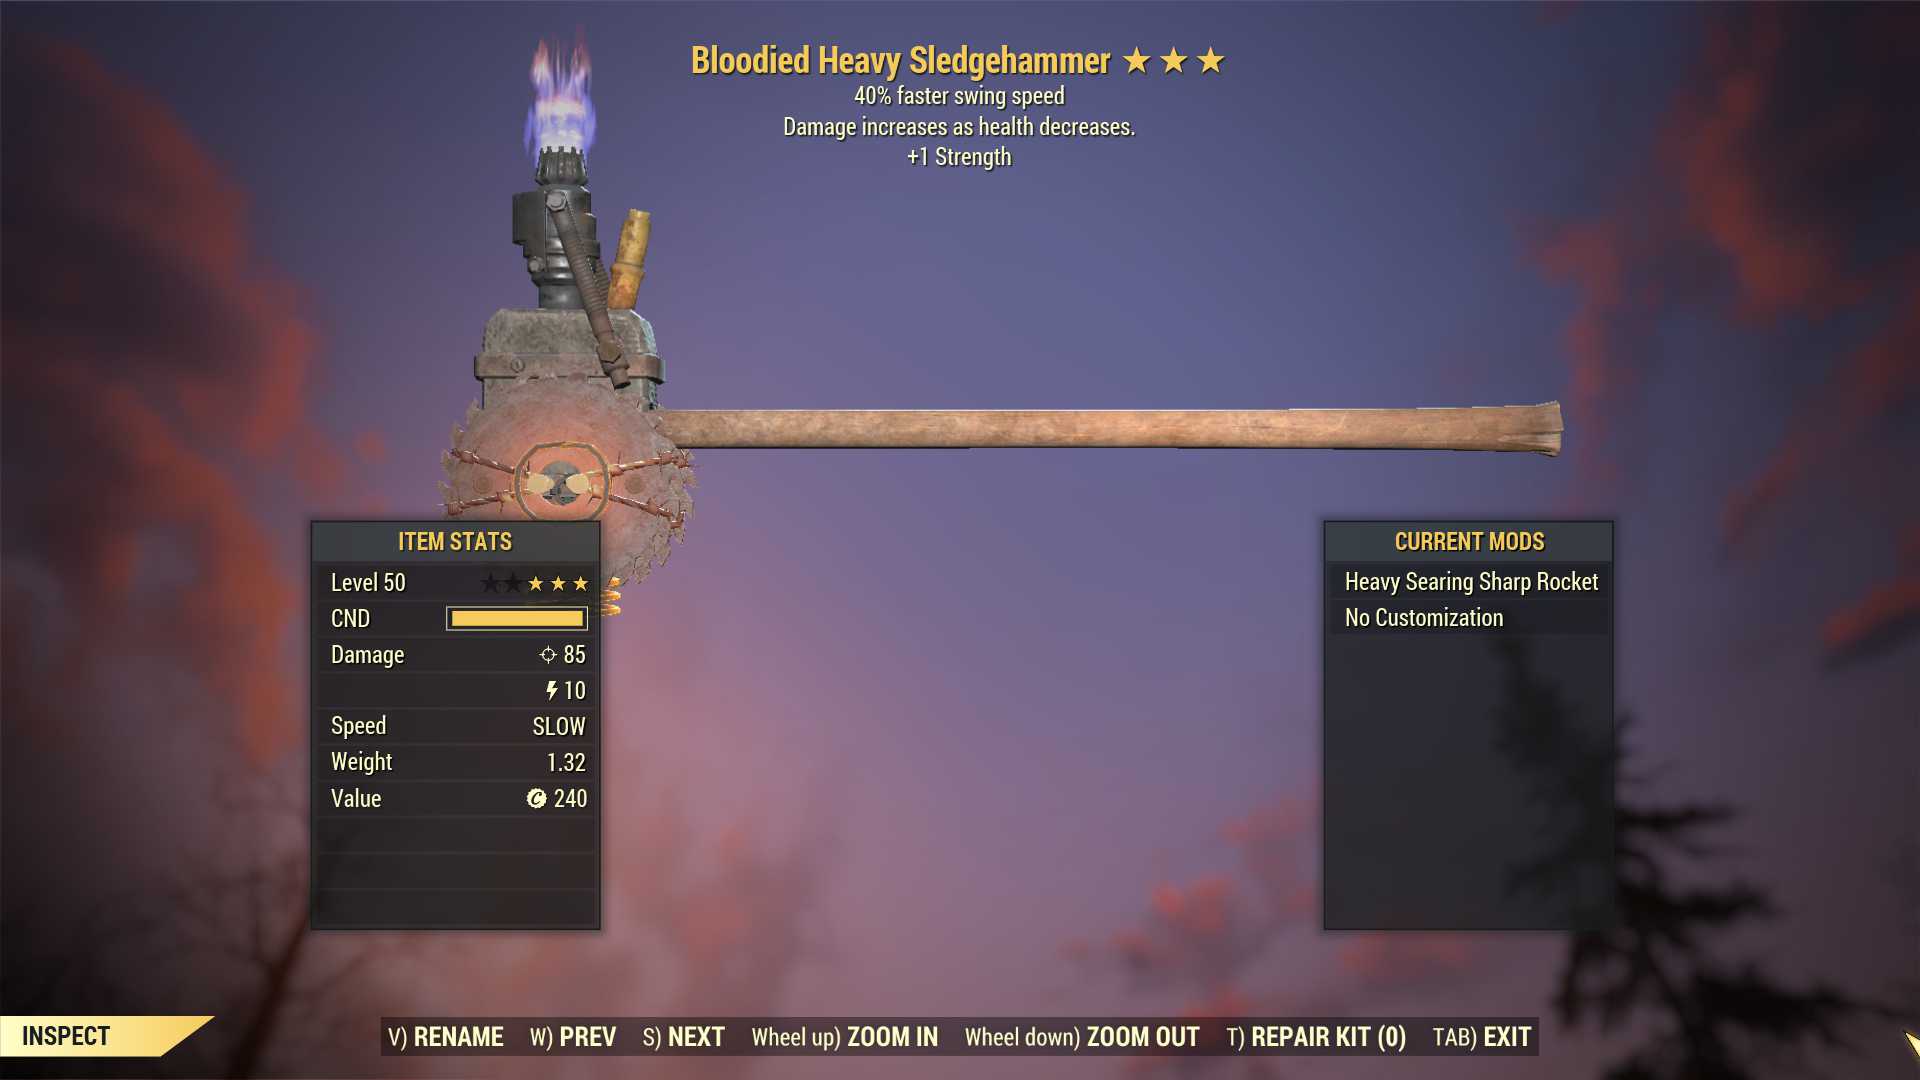 Bloodied Sledgehammer (40% Faster Swing Speed, +1 Strength)